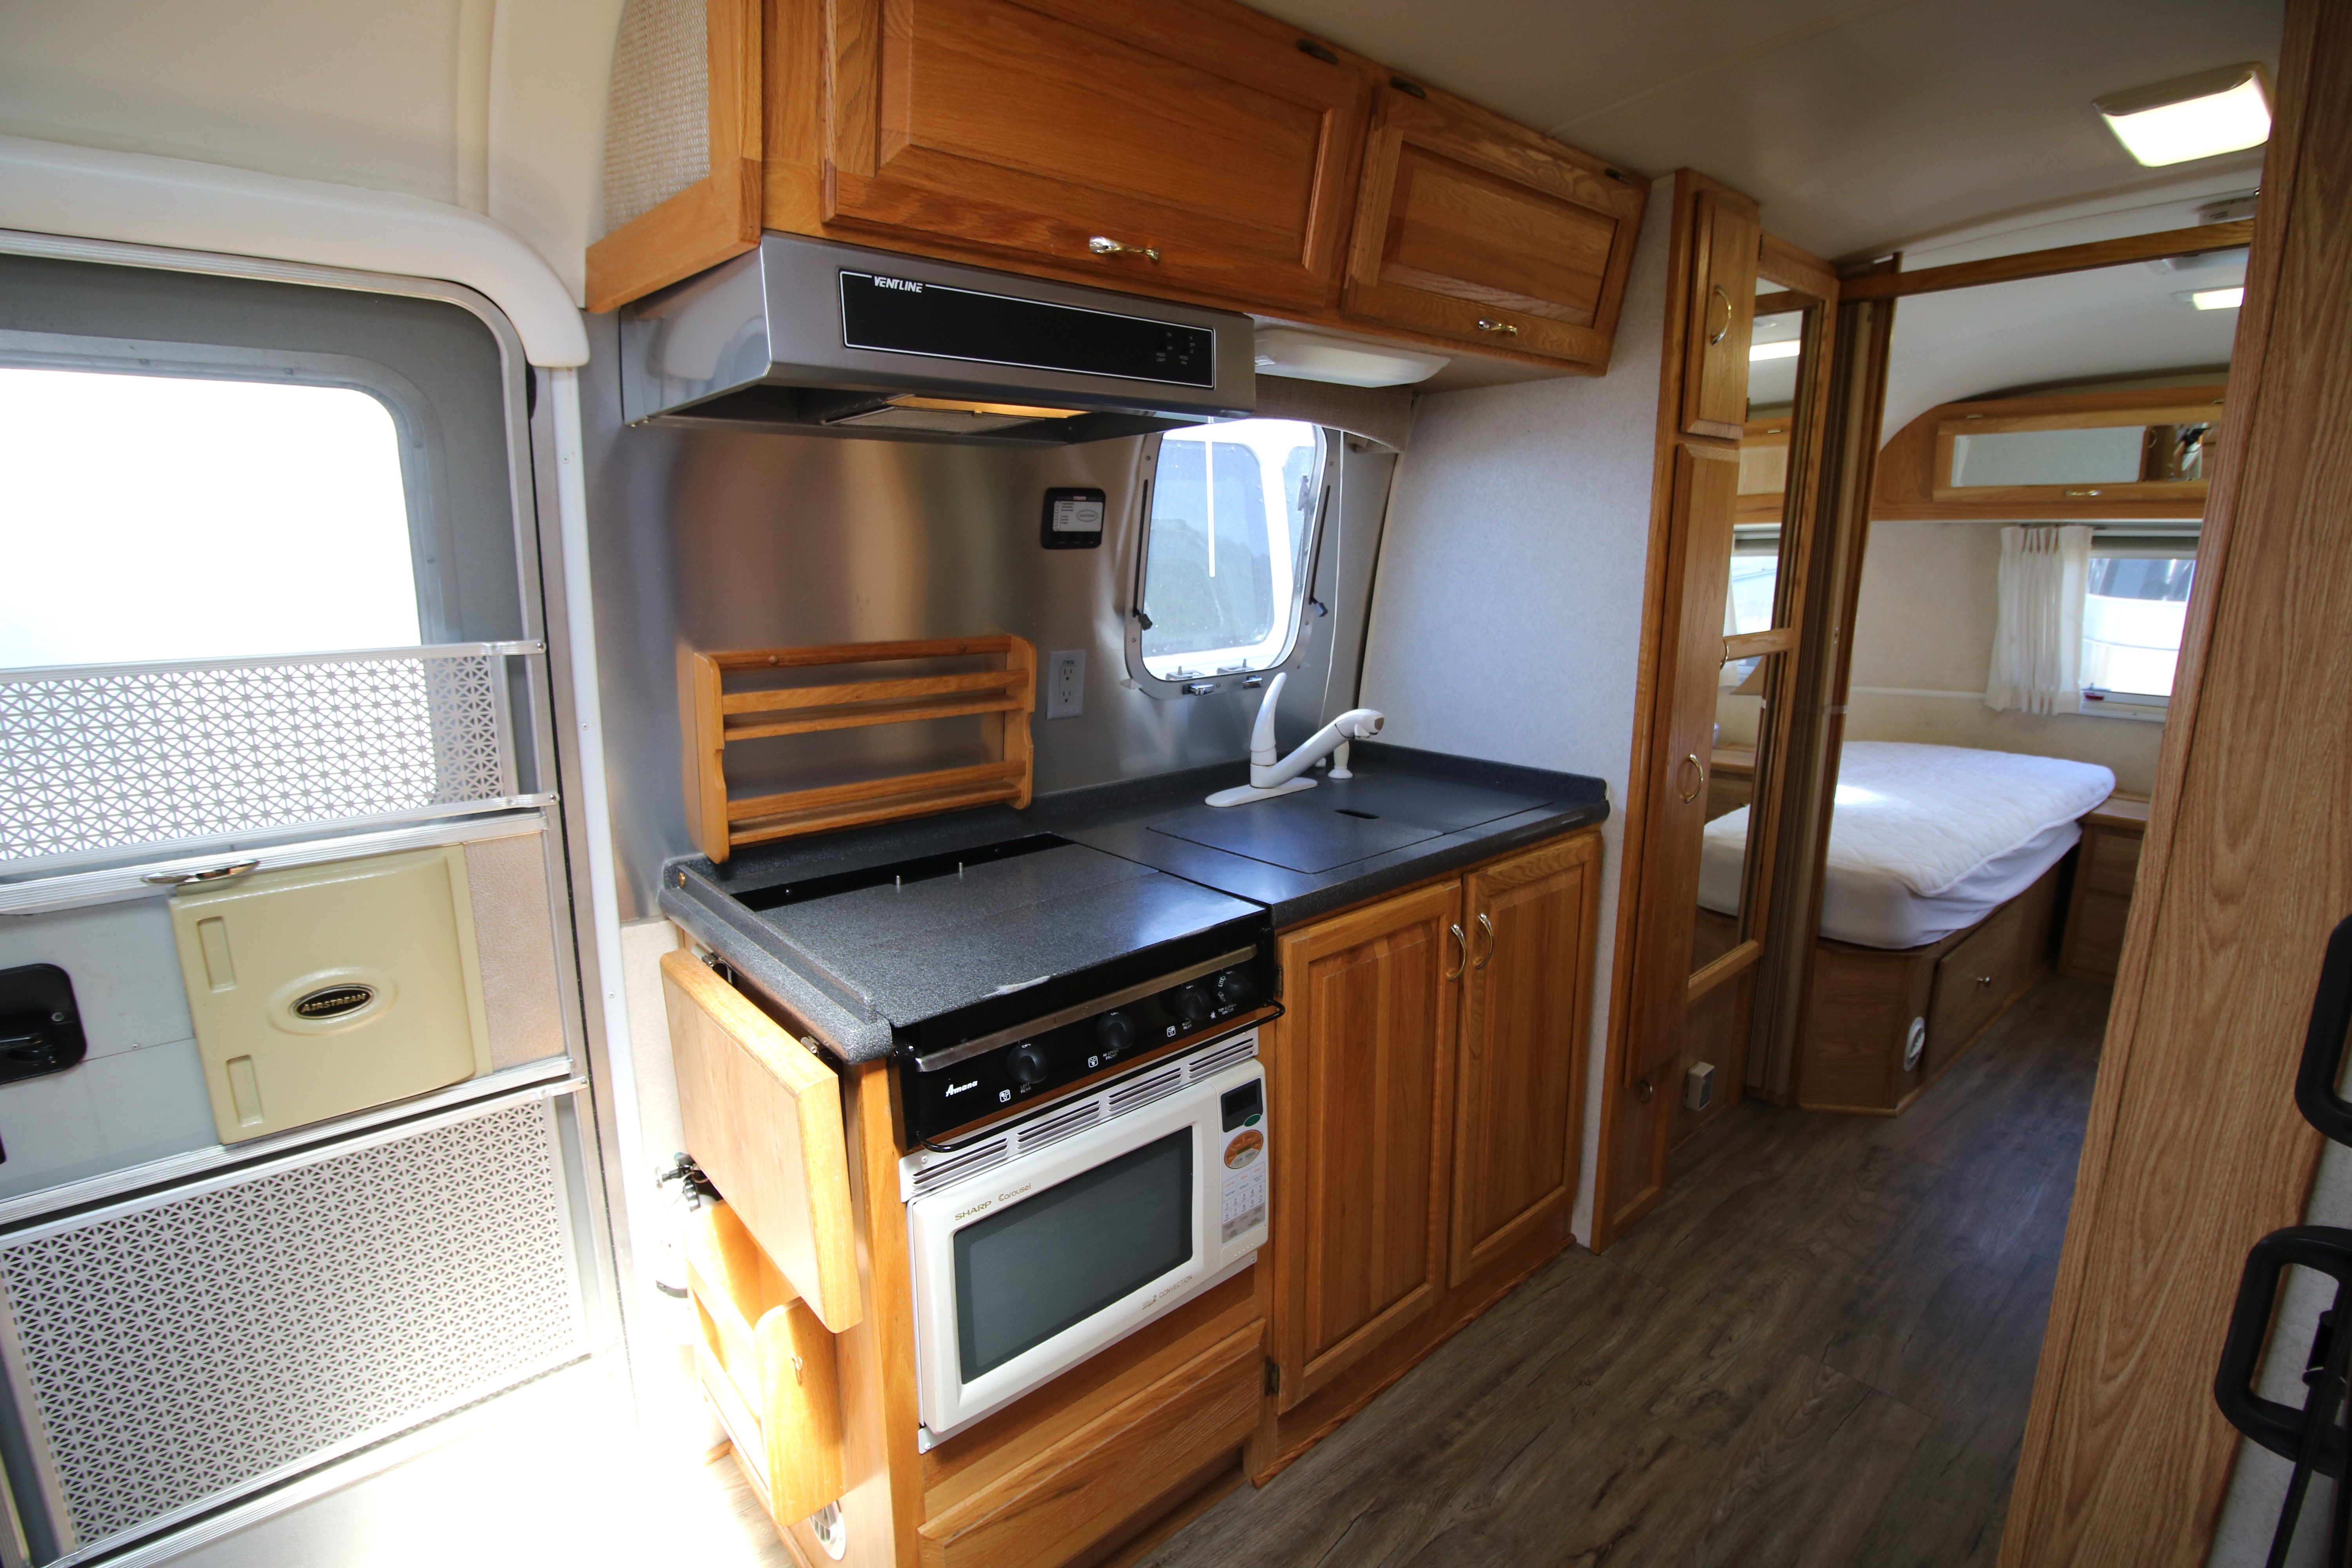 2005 Airstream classic 25rb twin